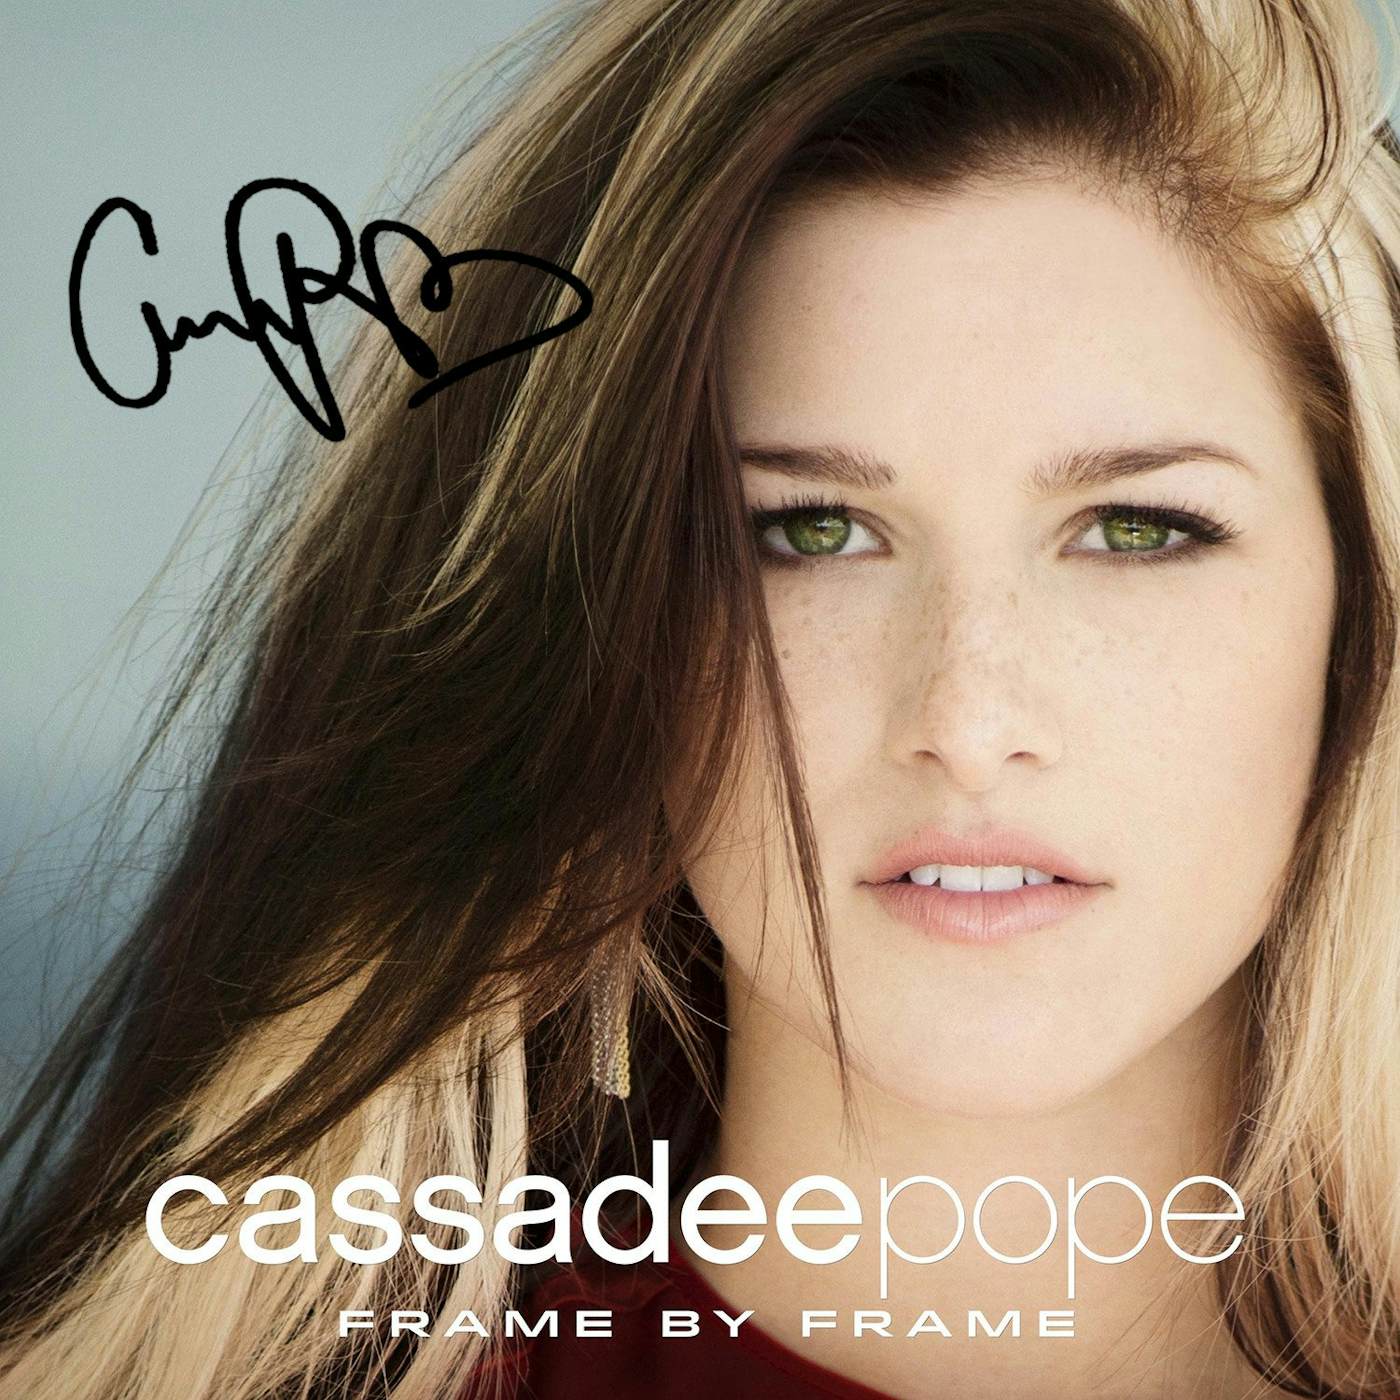 Cassadee Pope - Frame by Frame - Autographed